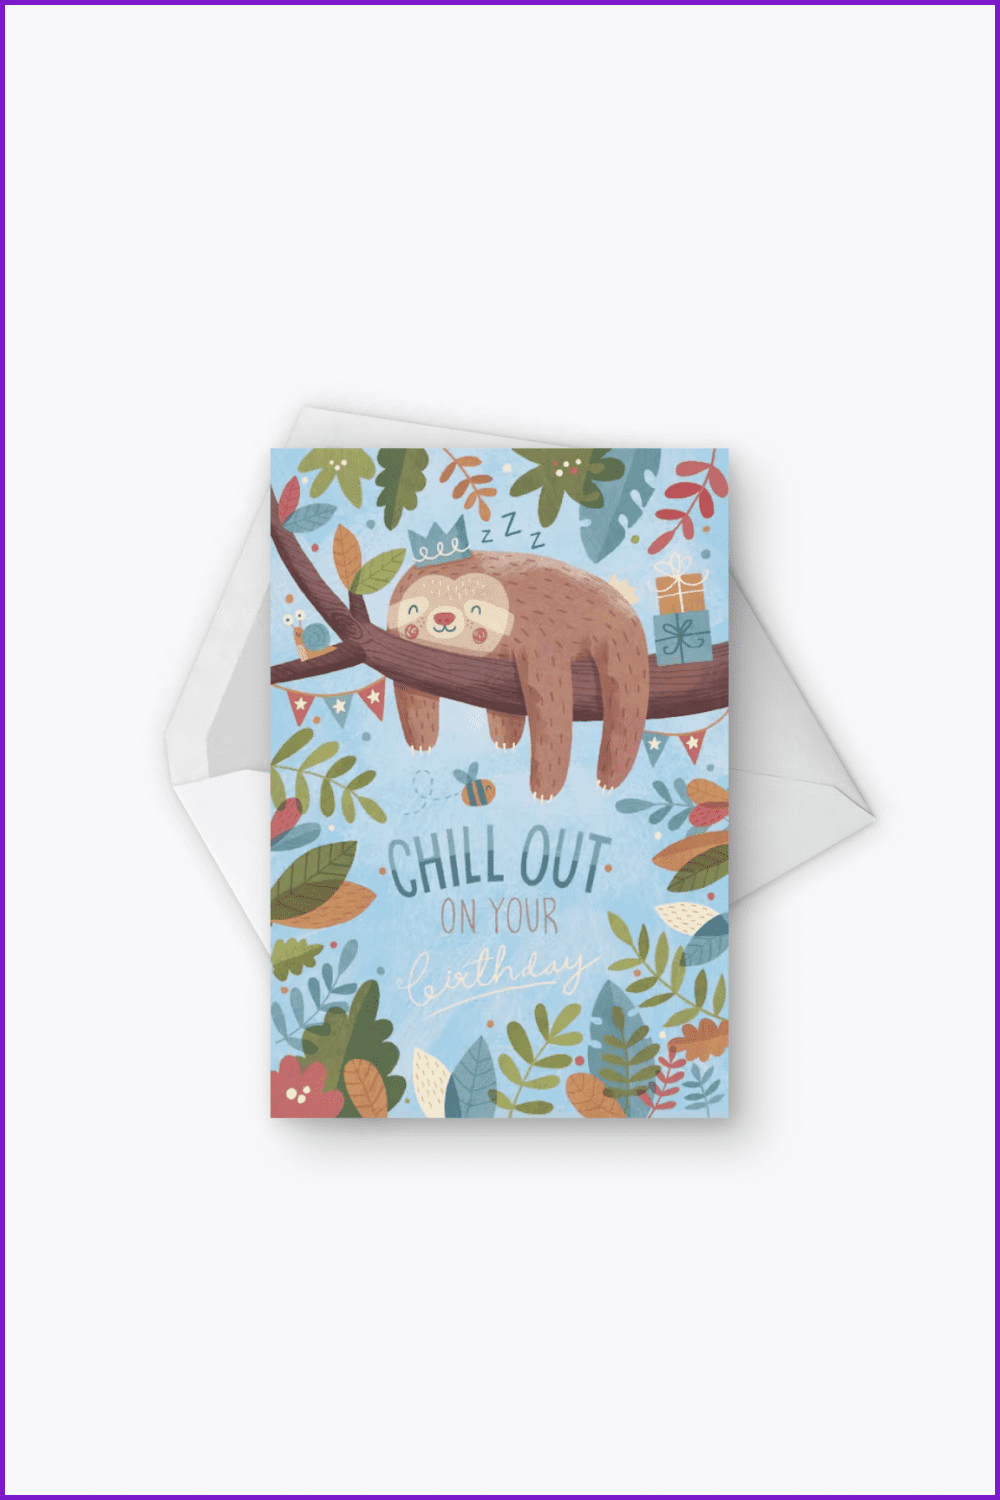 Blue card with a resting sloth with a crown on a tree branch.